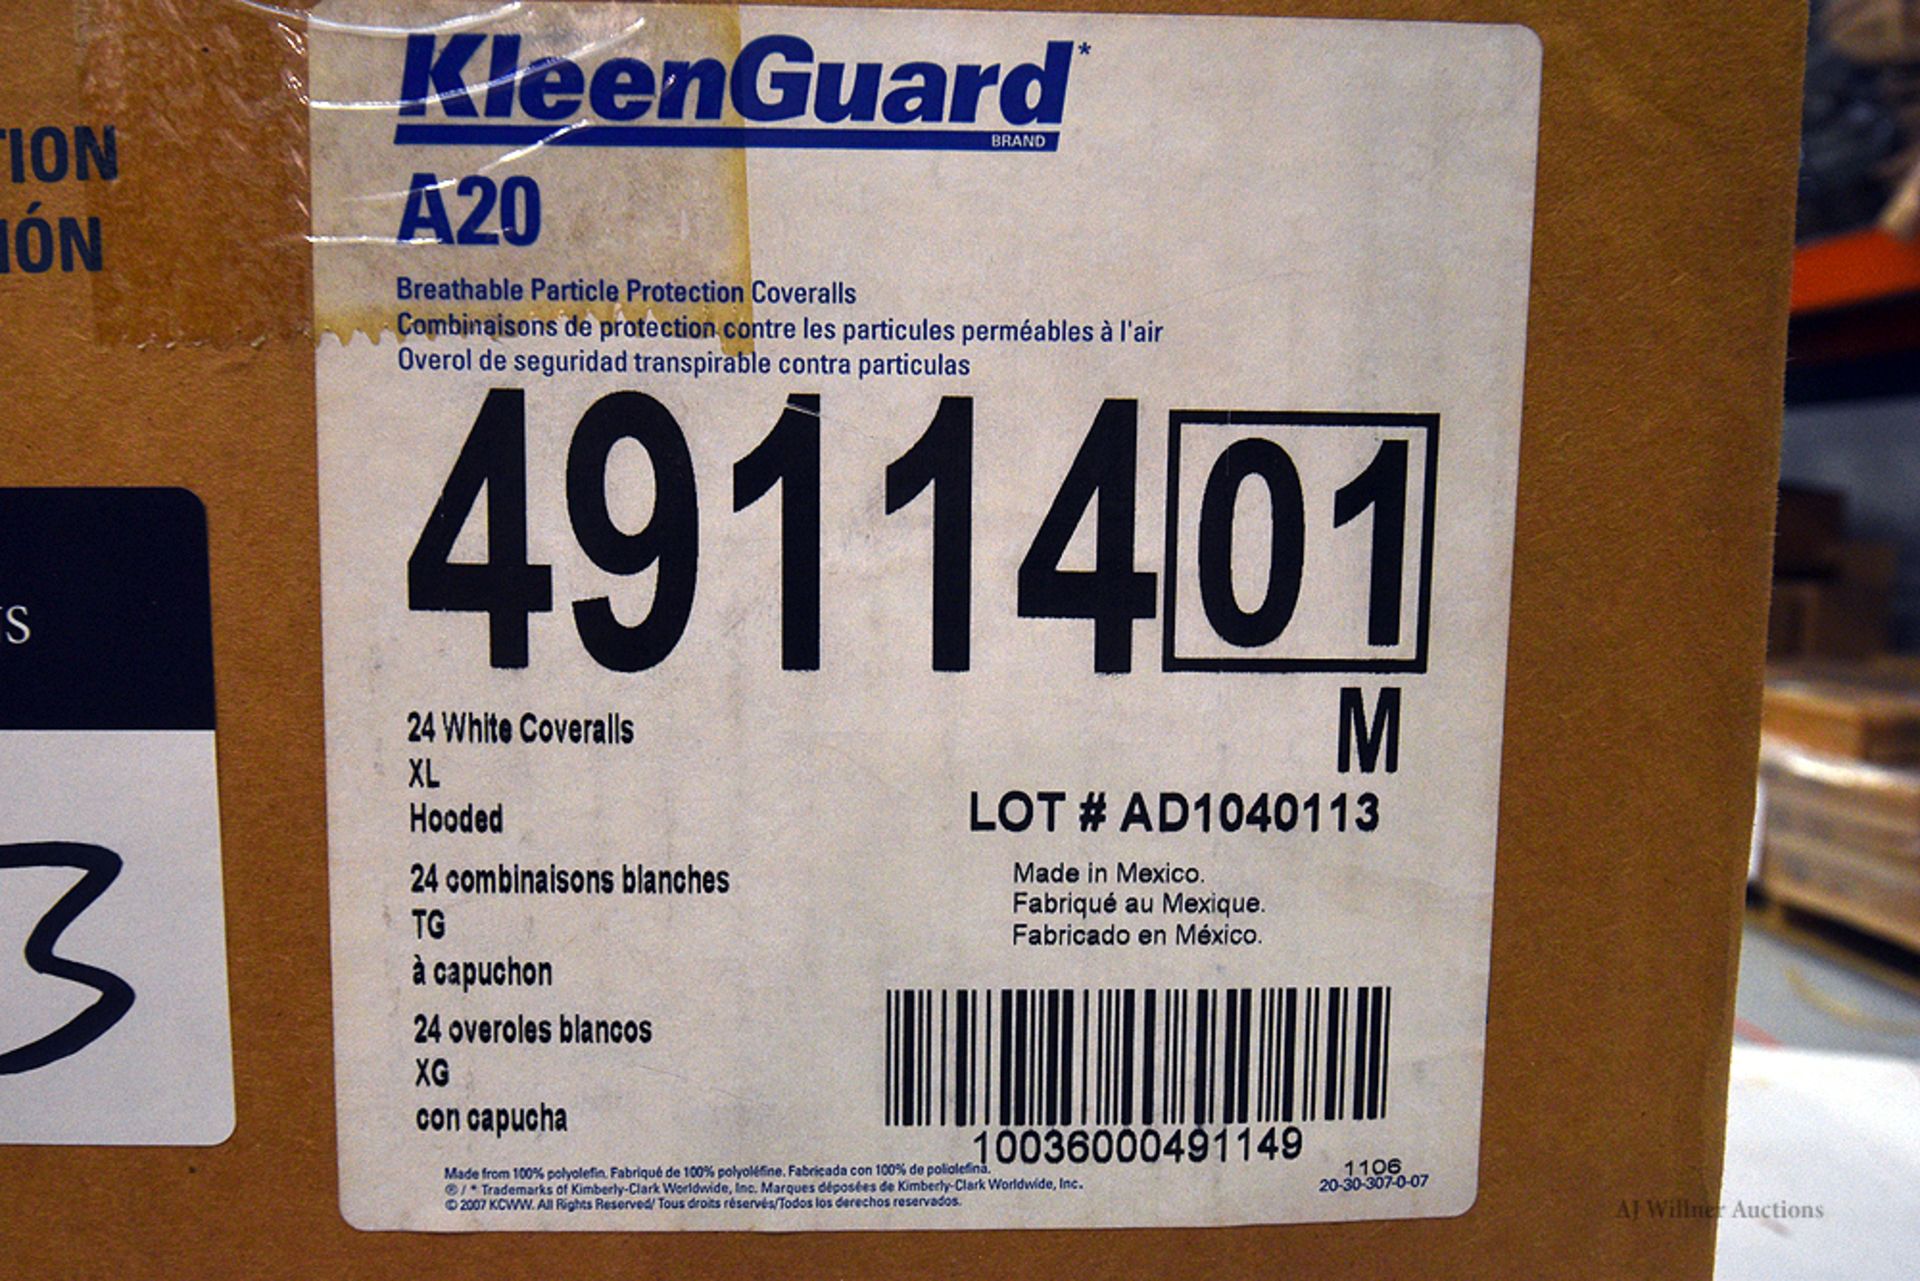 Boxes of 24pc - KleenGuard A20 White Coveralls/XL/Hooded - Image 2 of 2